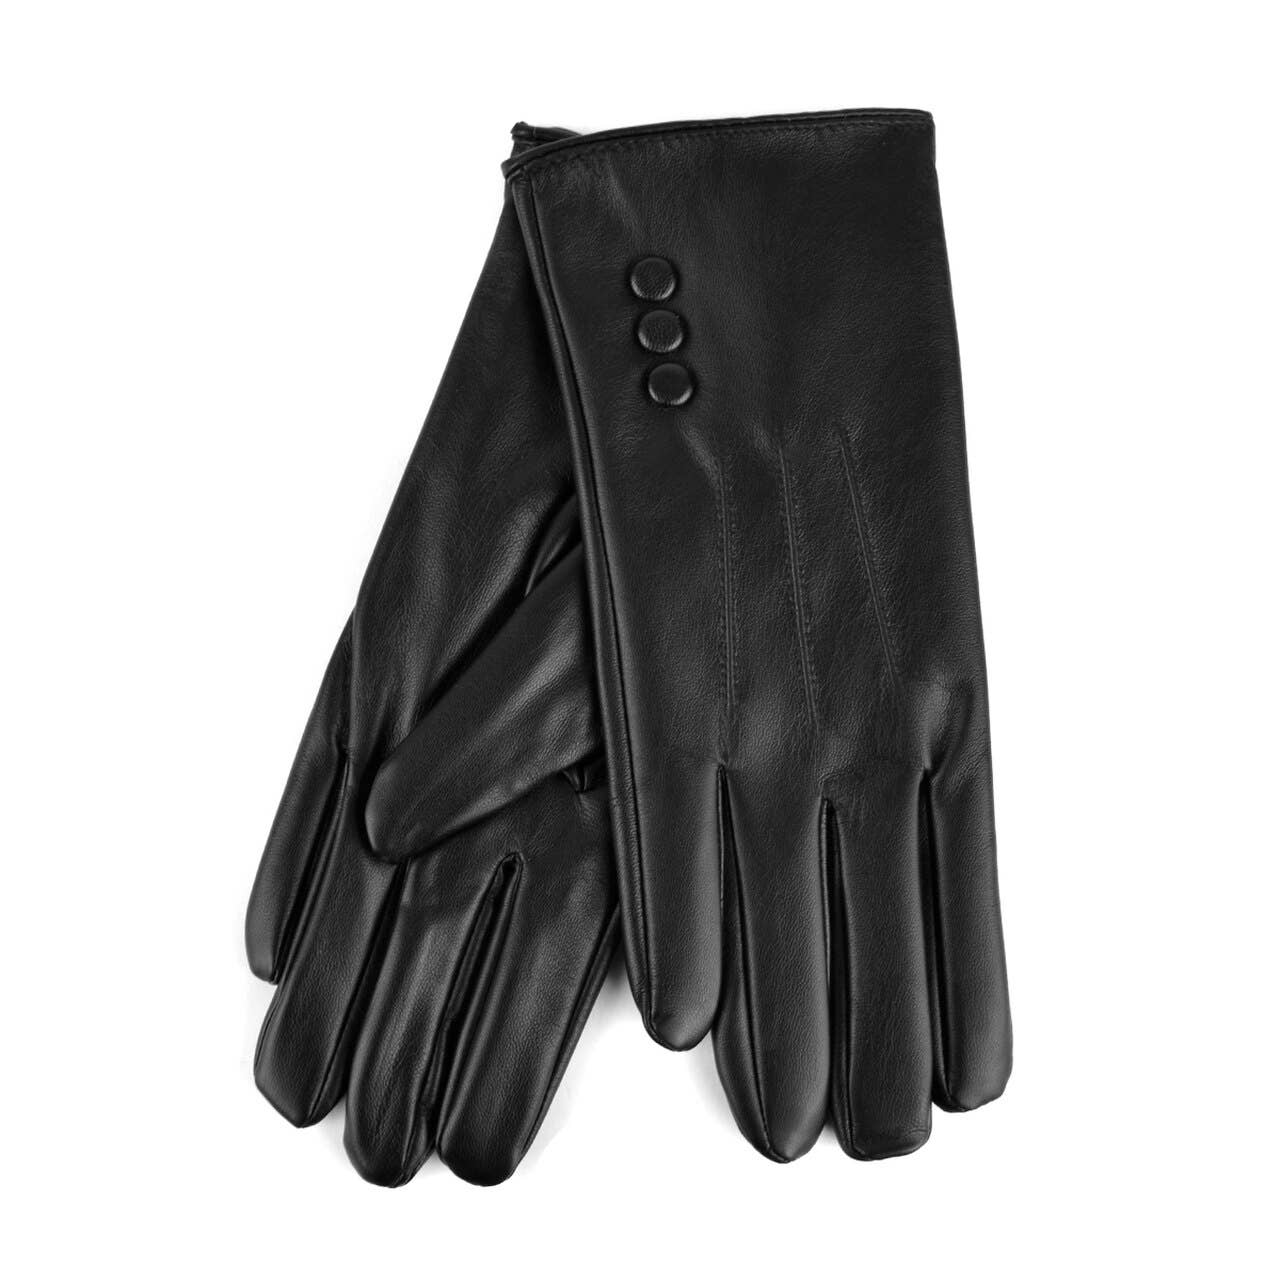 Women's PU Leather Winter Touch Screen Gloves: Navy / S/M